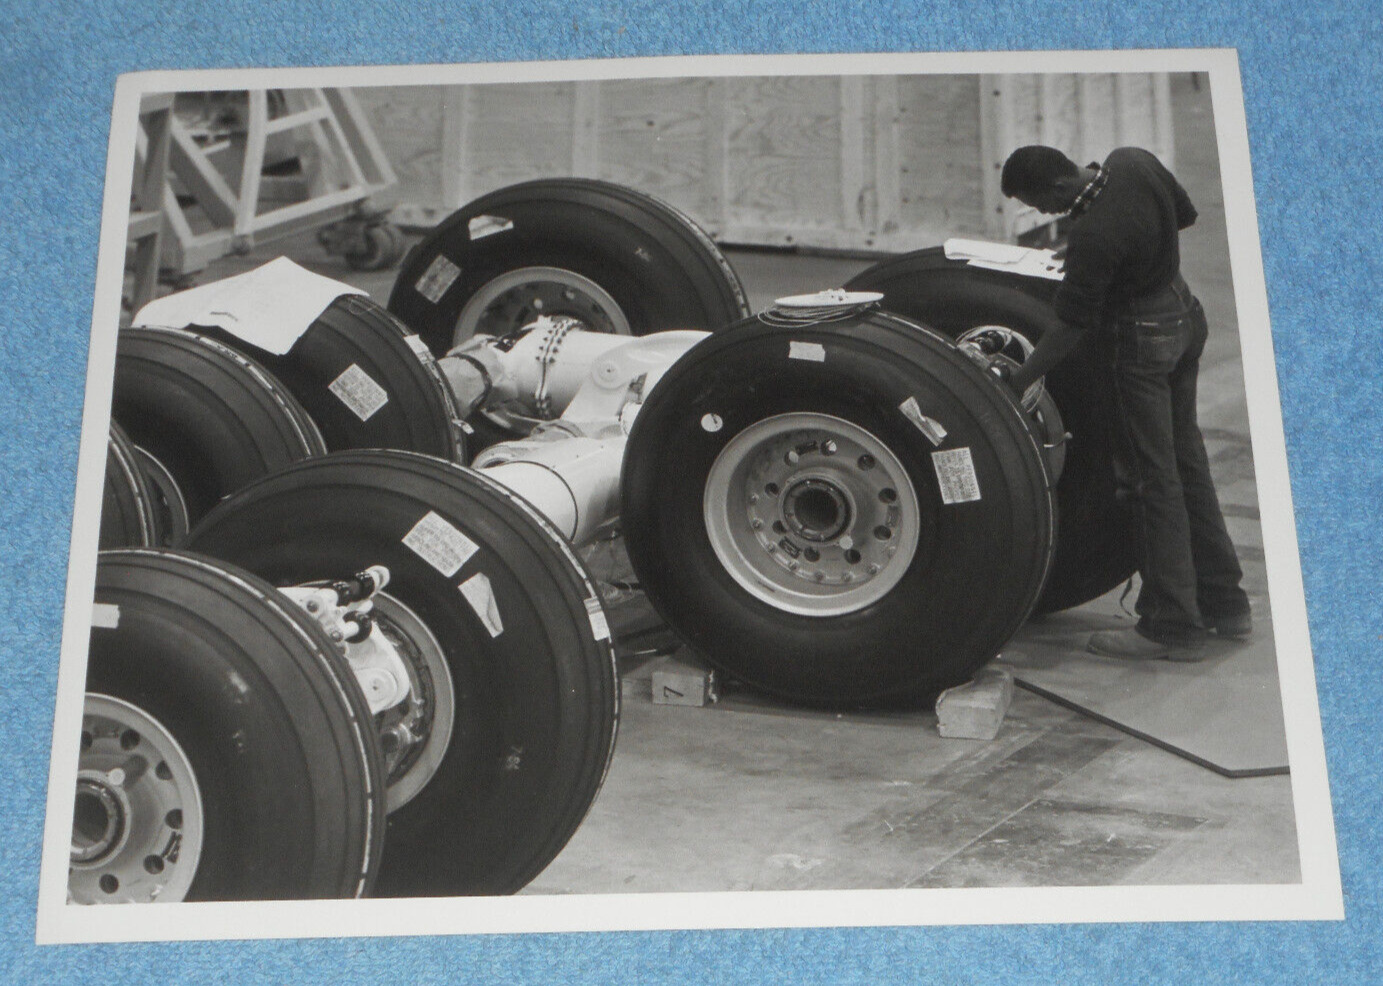 Vintage Lockheed Assembly Plant Photo Worker Aircraft Landing Tires C-5 Galaxy?